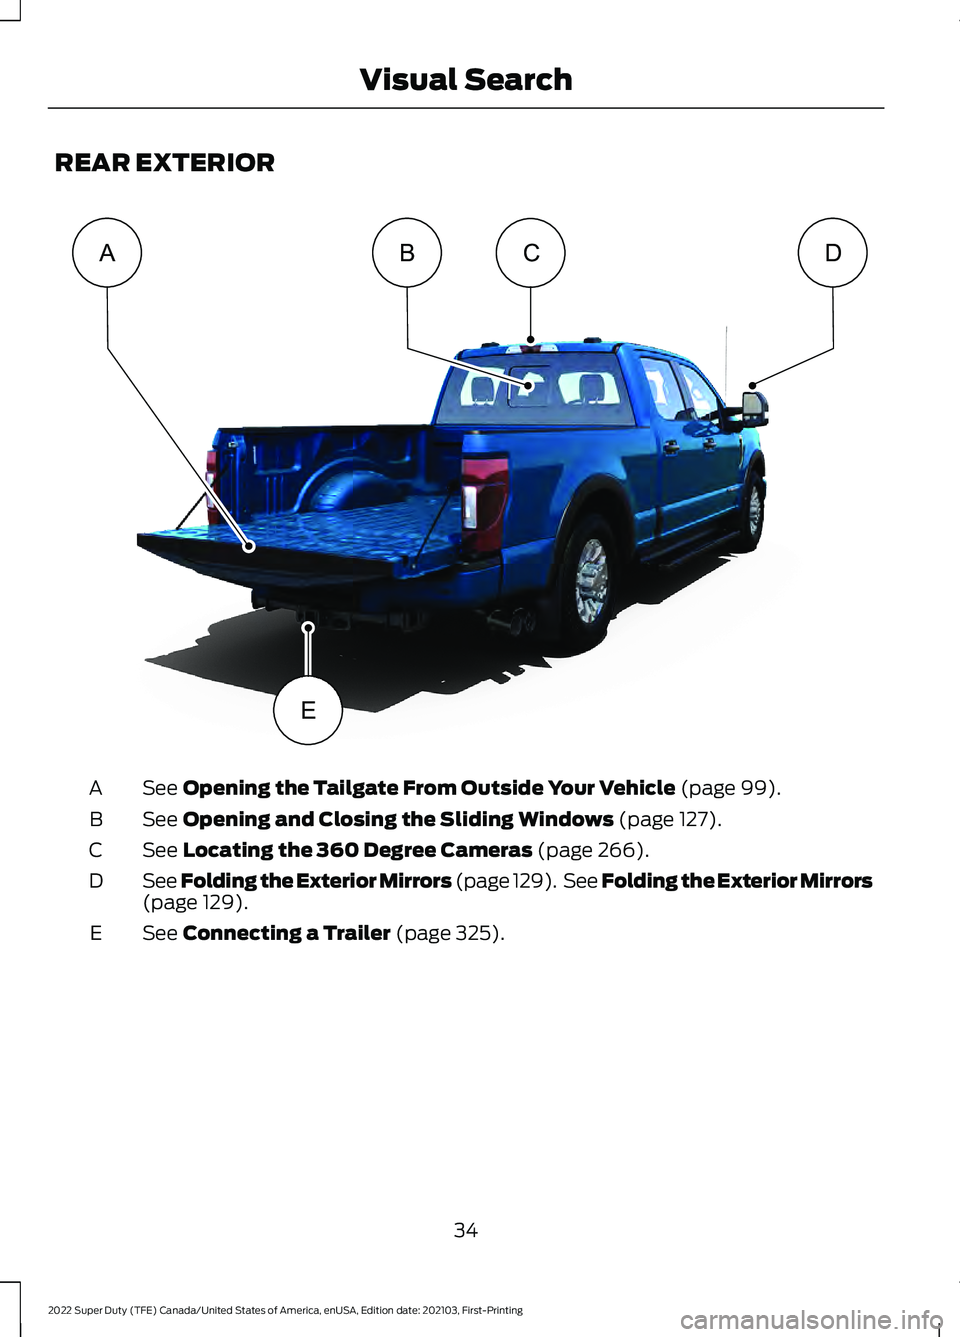 FORD F-450 2022  Owners Manual REAR EXTERIOR
See Opening the Tailgate From Outside Your Vehicle (page 99).
A
See 
Opening and Closing the Sliding Windows (page 127).
B
See 
Locating the 360 Degree Cameras (page 266).
C
See Folding 